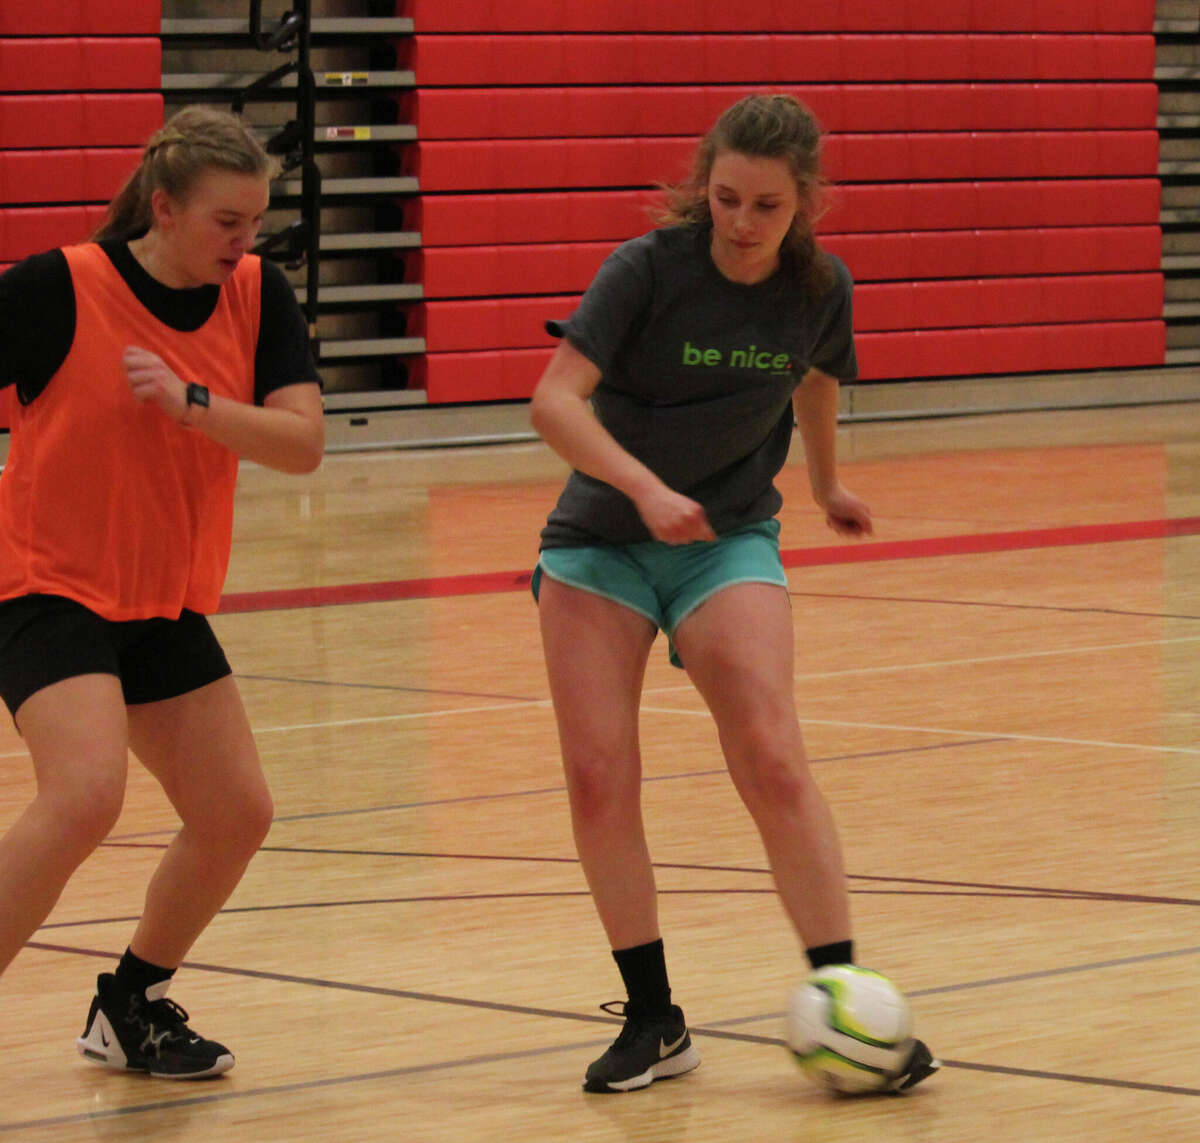 Reed City's Alex Stein (right) works with the ball against teammate Kaylin Smoes during a Tuesday practice at the Reed City Middle School.